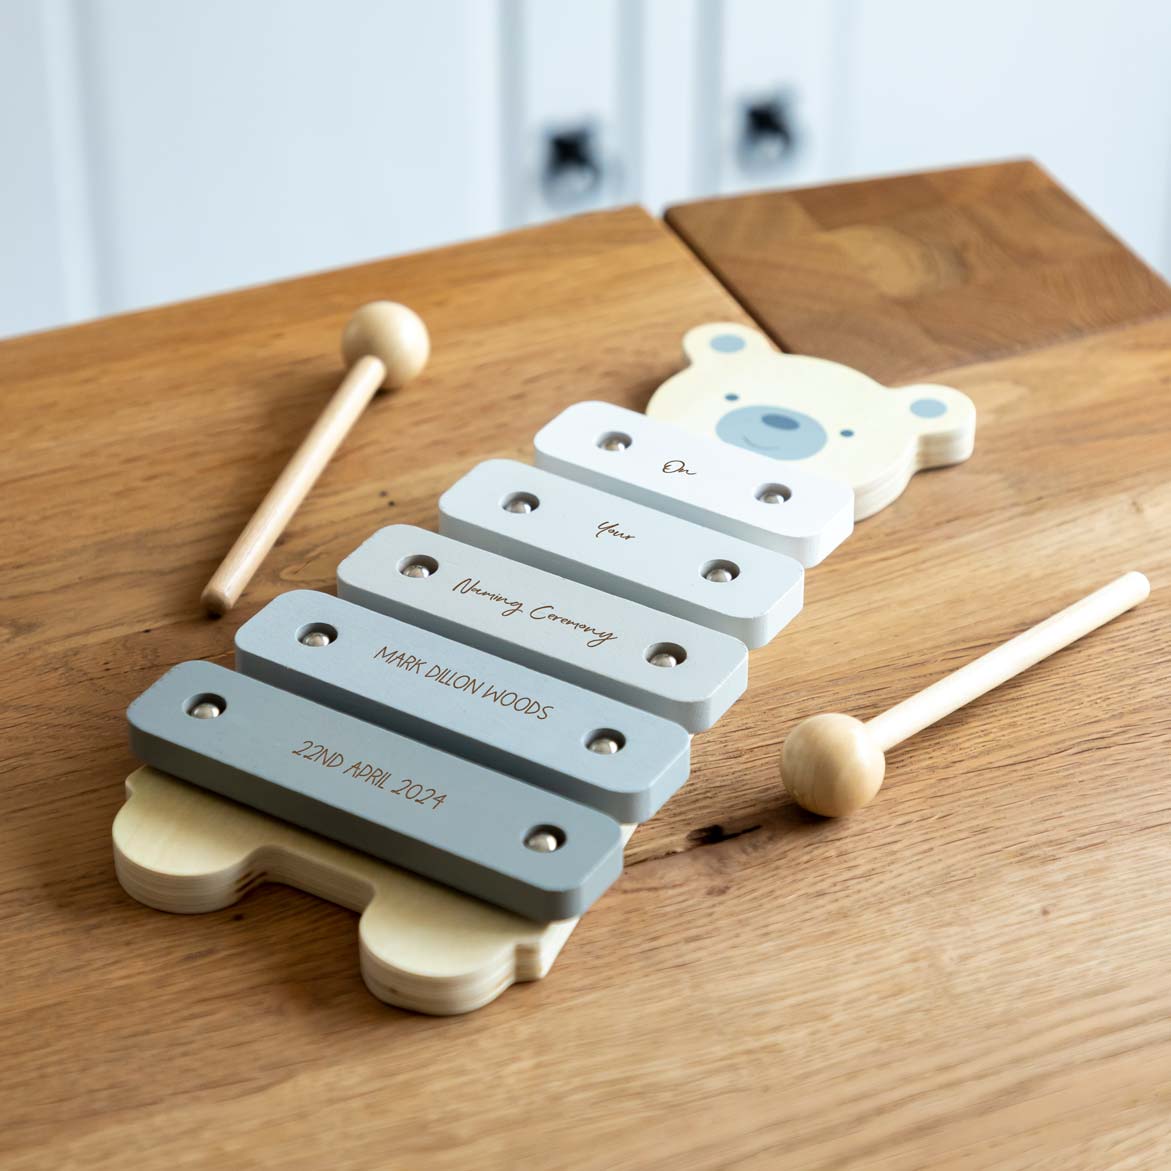 Personalised Bear Xylophone For Christening Baptism Naming Day Gift